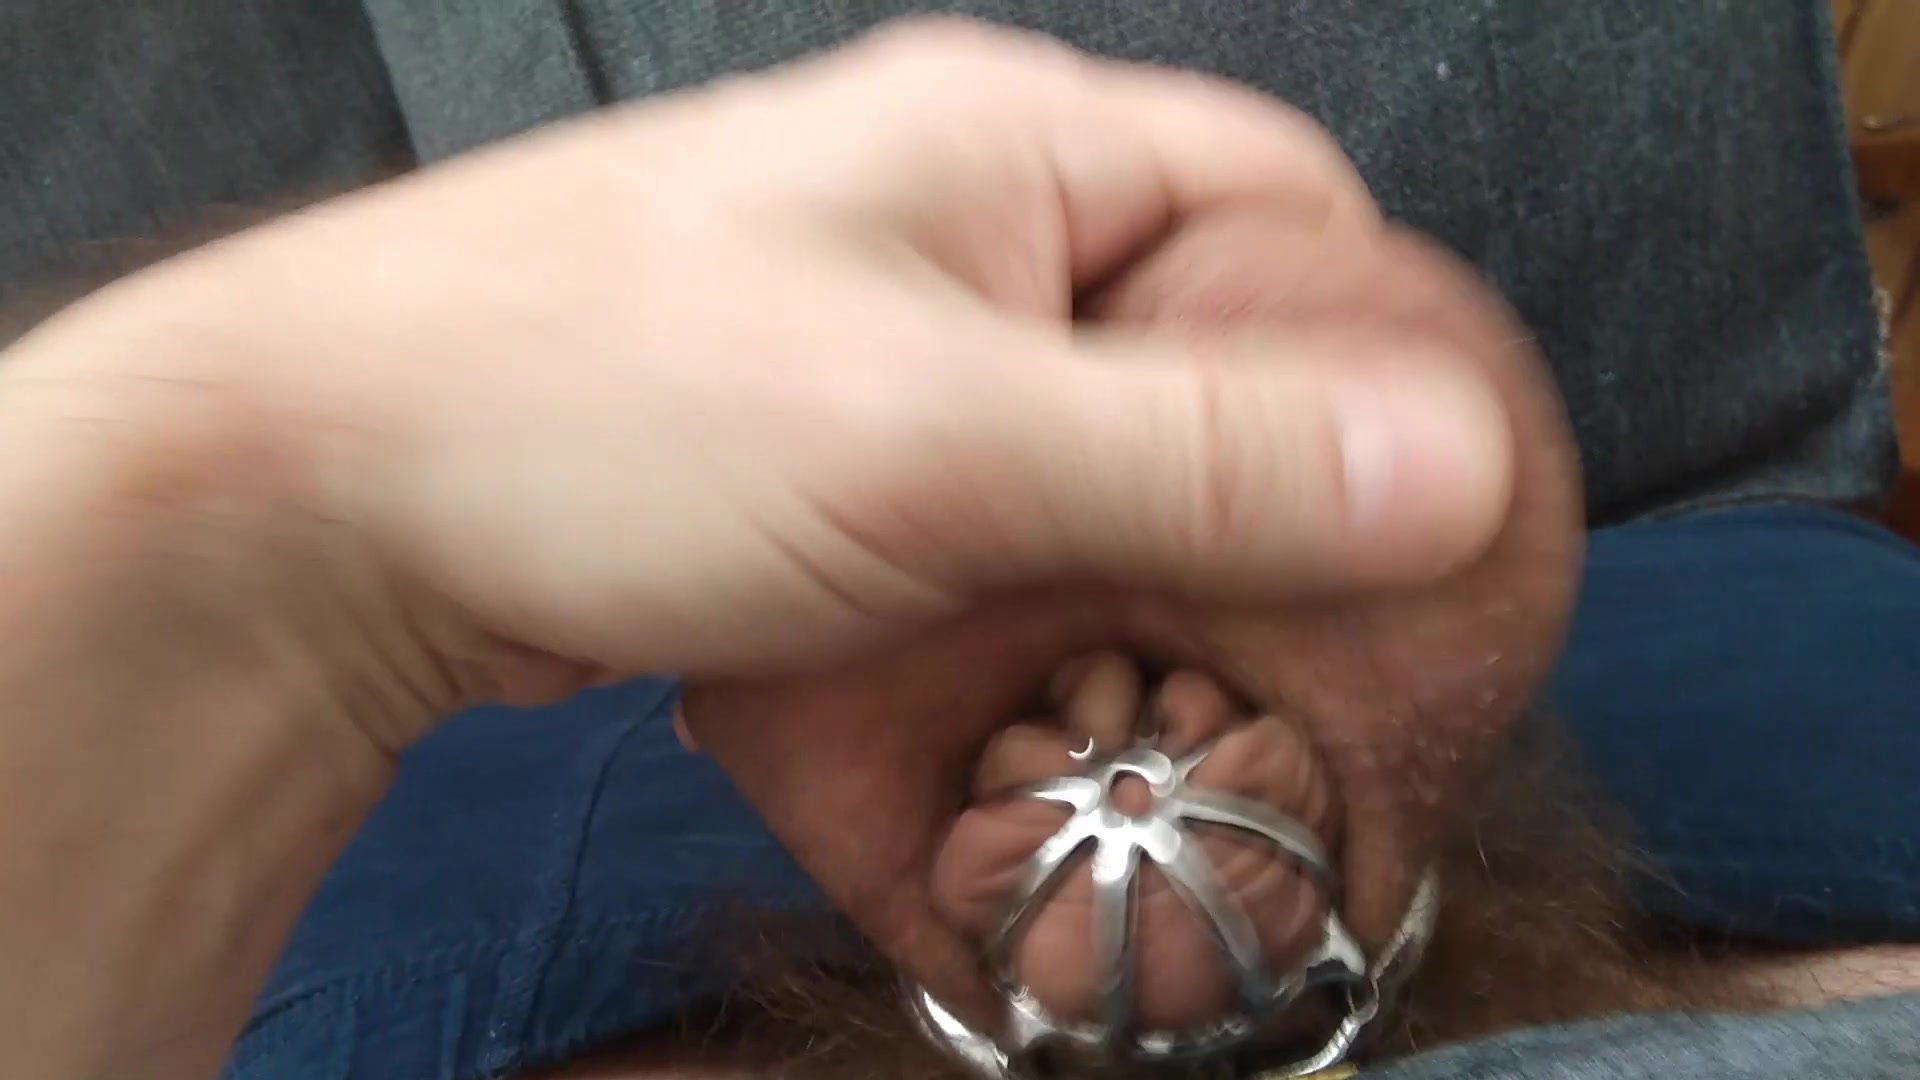 Unshaven balls slapping in chastity